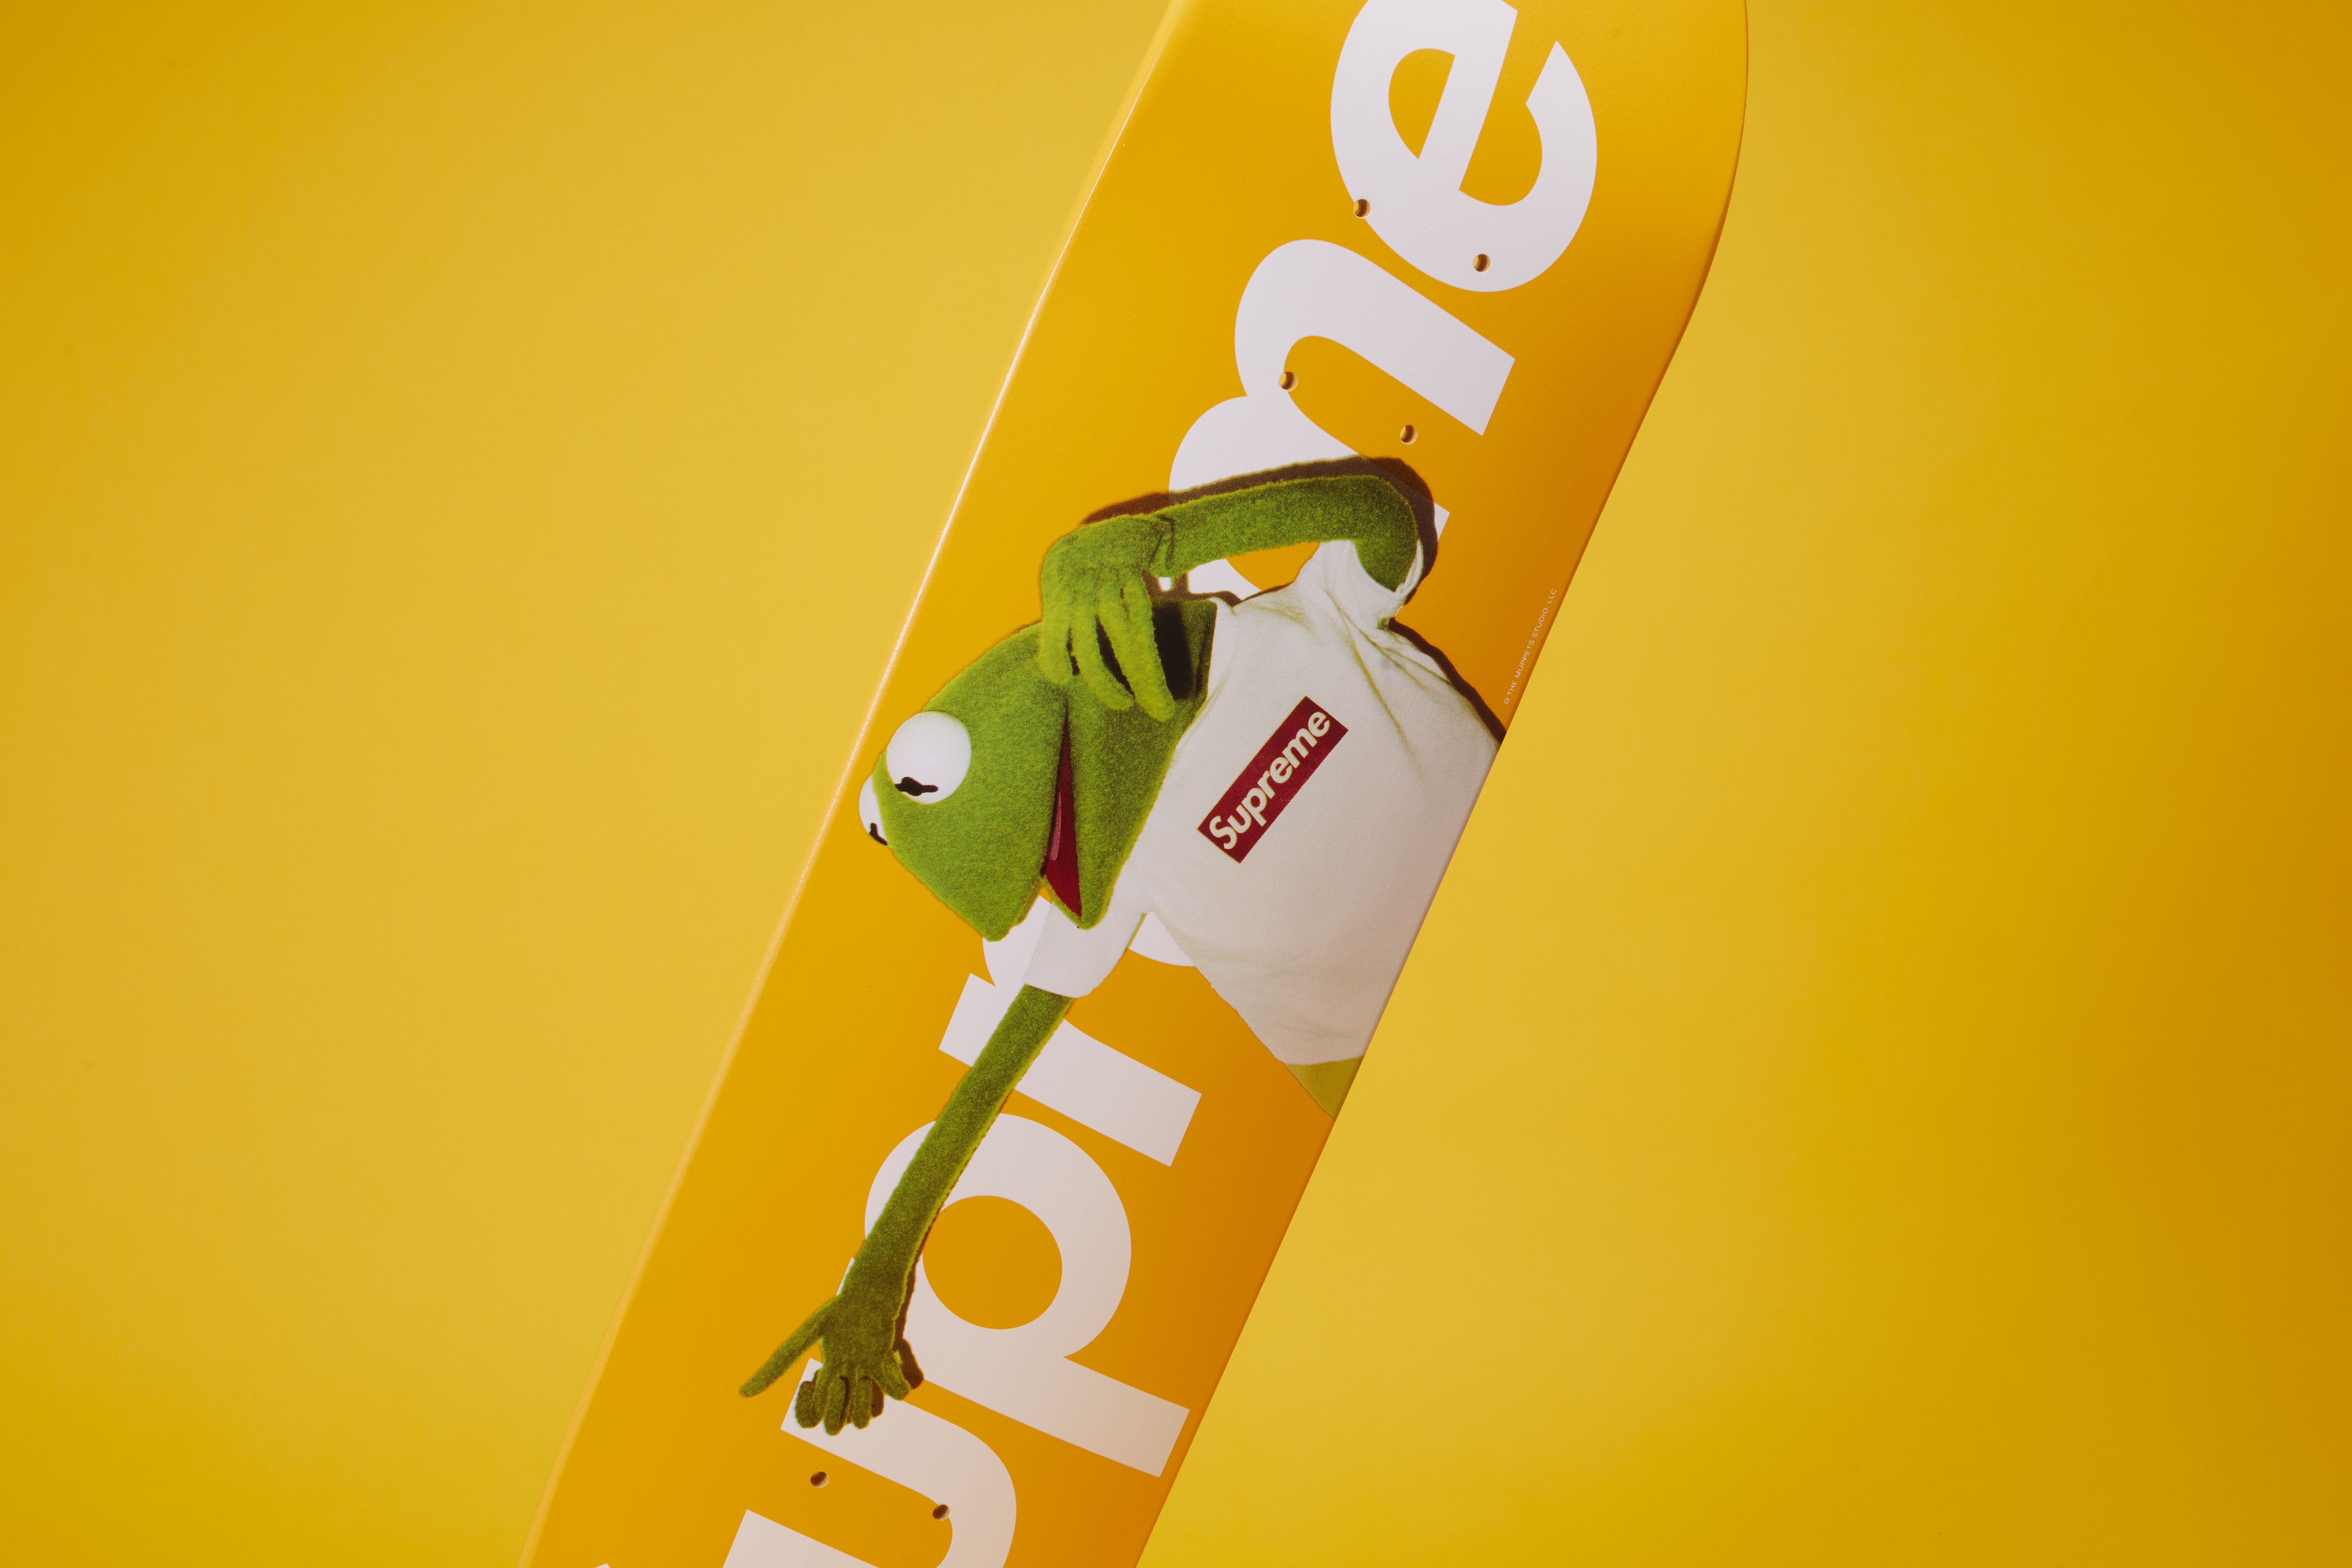 StockX Select: Win The Legendary Supreme Kermit The Frog Deck